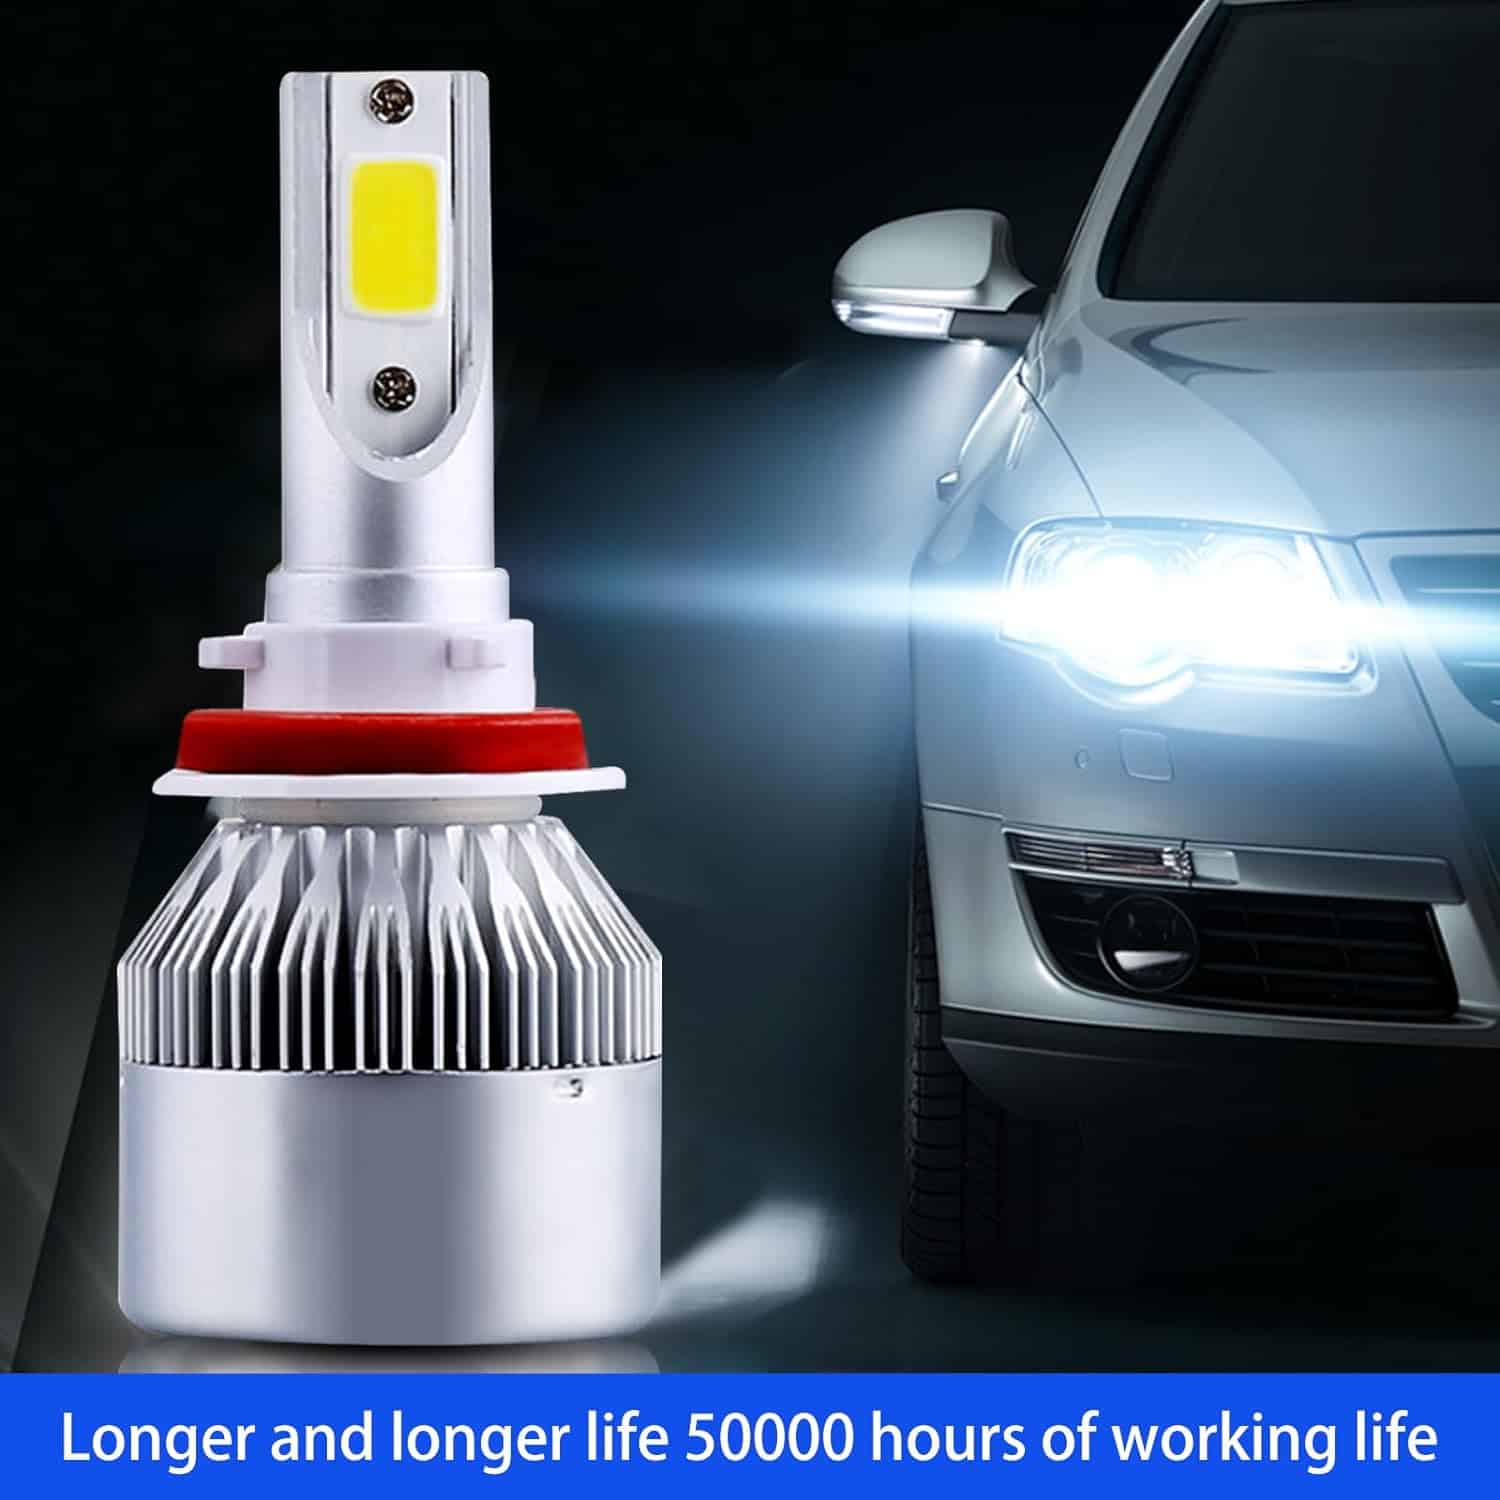 Miytsya 2 PCS H11/H8/H9 Car C6 LED Light, 6000K 3800LM Super Bright High Beam, Plug and Play Waterproof Bulb Replacement, Universal Bulb Lighting Conversion for Most Cars (White)